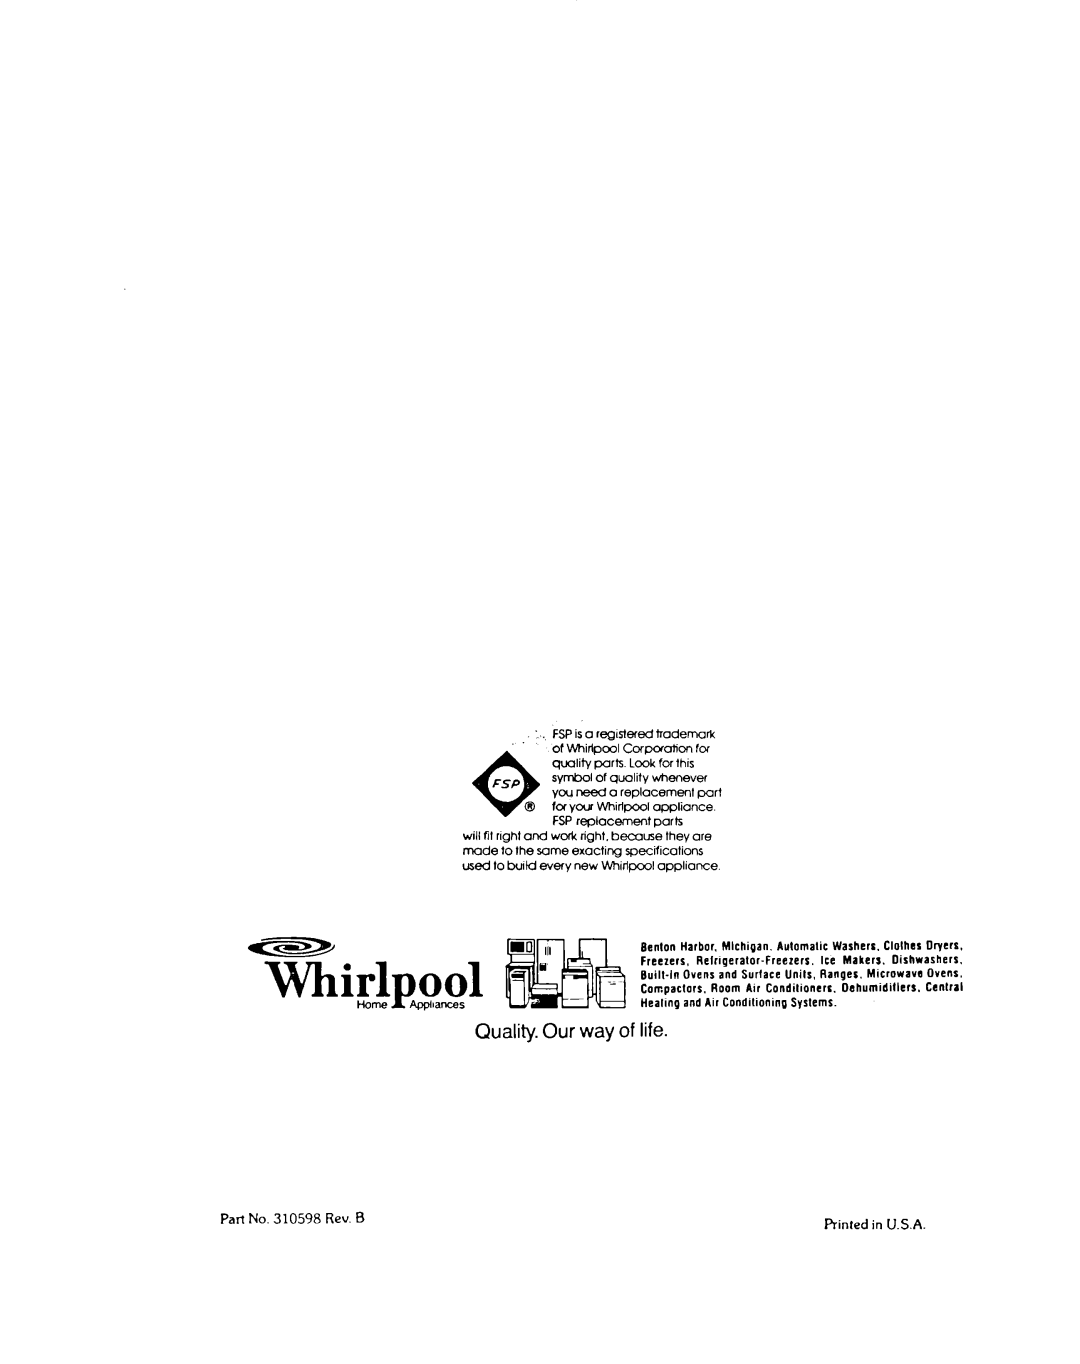 Whirlpool RJE-3300 manual Quality. Our way of life 